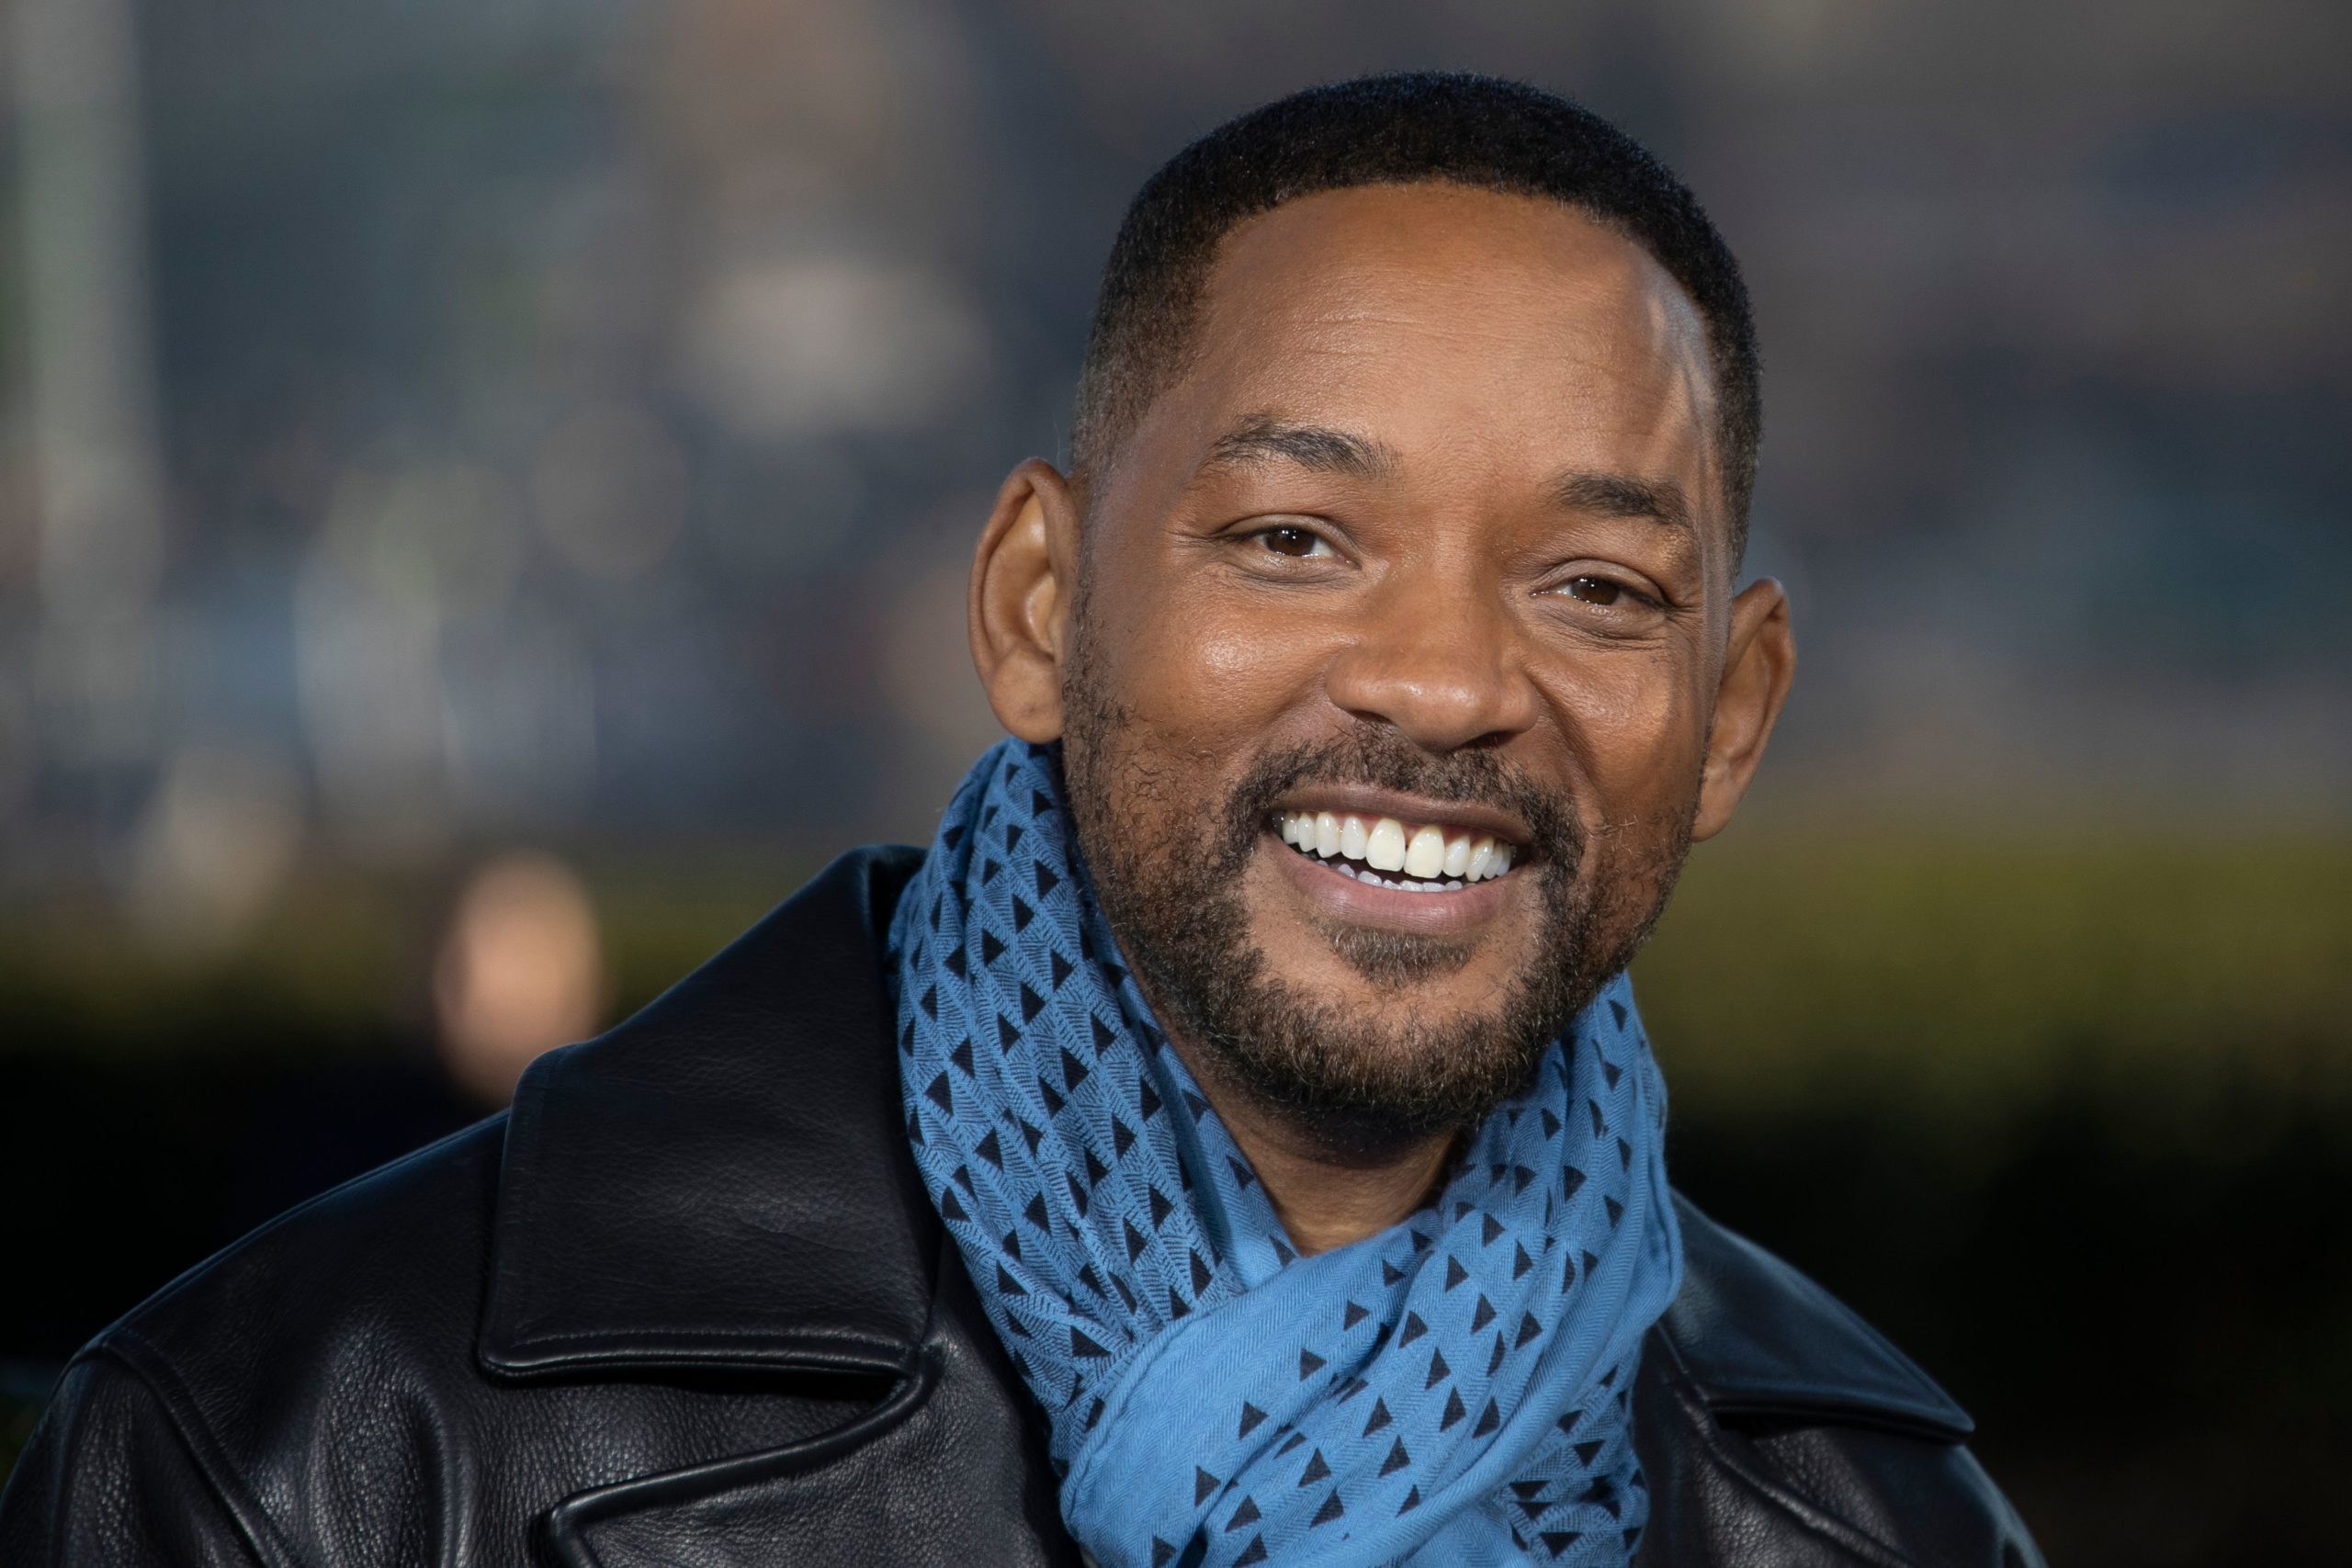 US actors Will Smith poses at the 'Bad Boys For Life' launching photocall in Paris, in front of the Eiffel Tower, on January 06, 2020. (Photo by Thomas SAMSON / AFP) (Photo by THOMAS SAMSON/AFP via Getty Images)